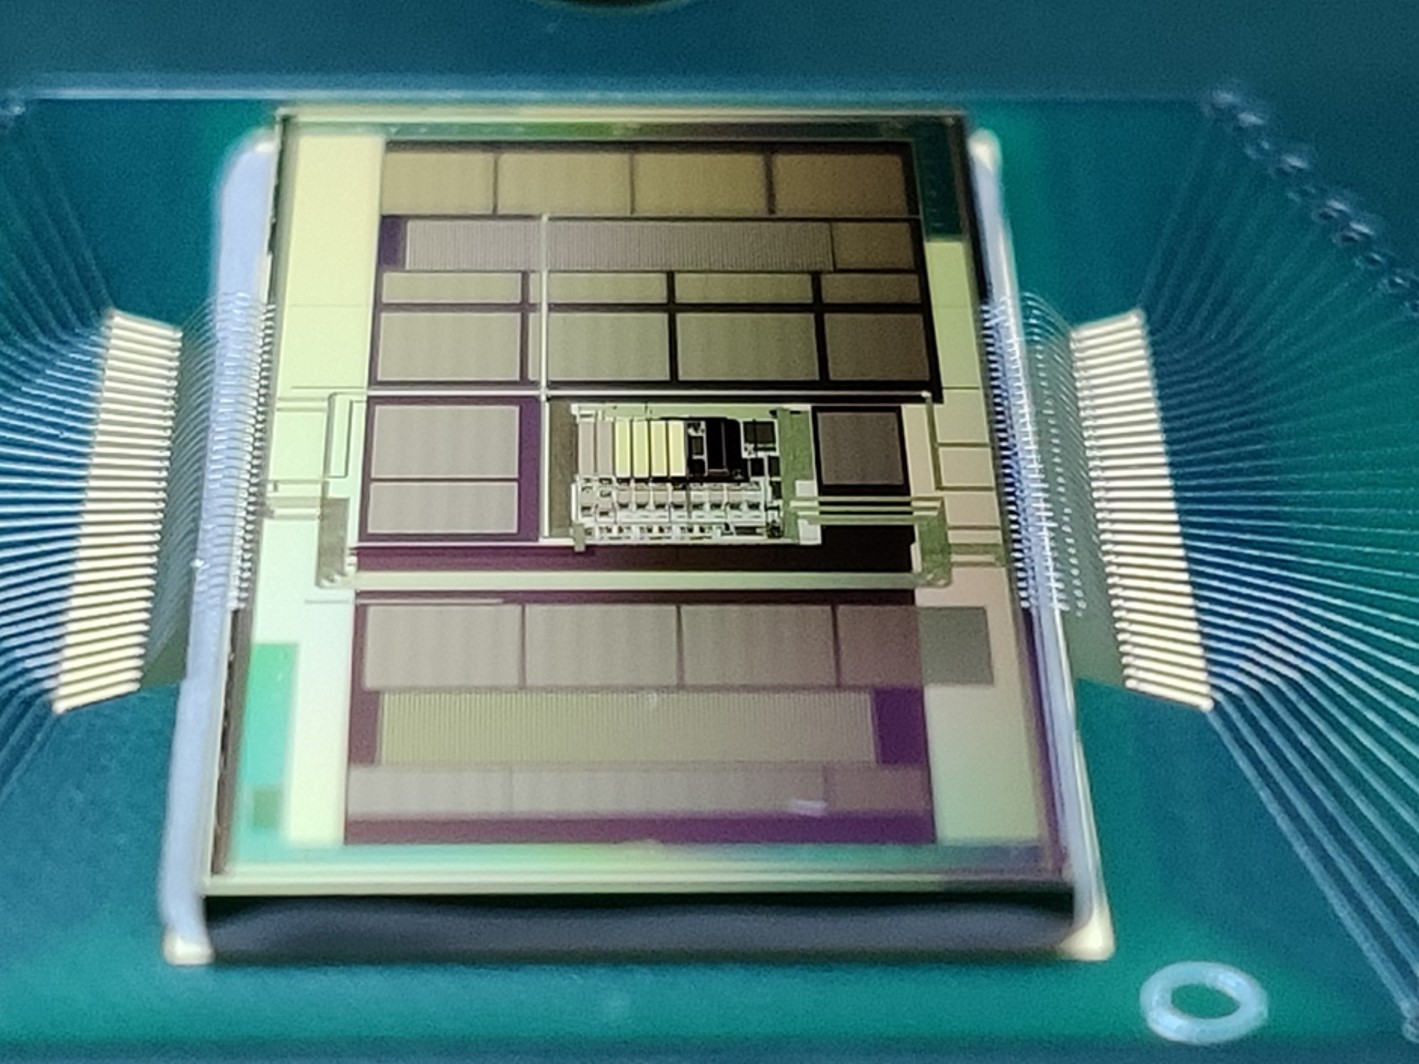 a close up of a chip